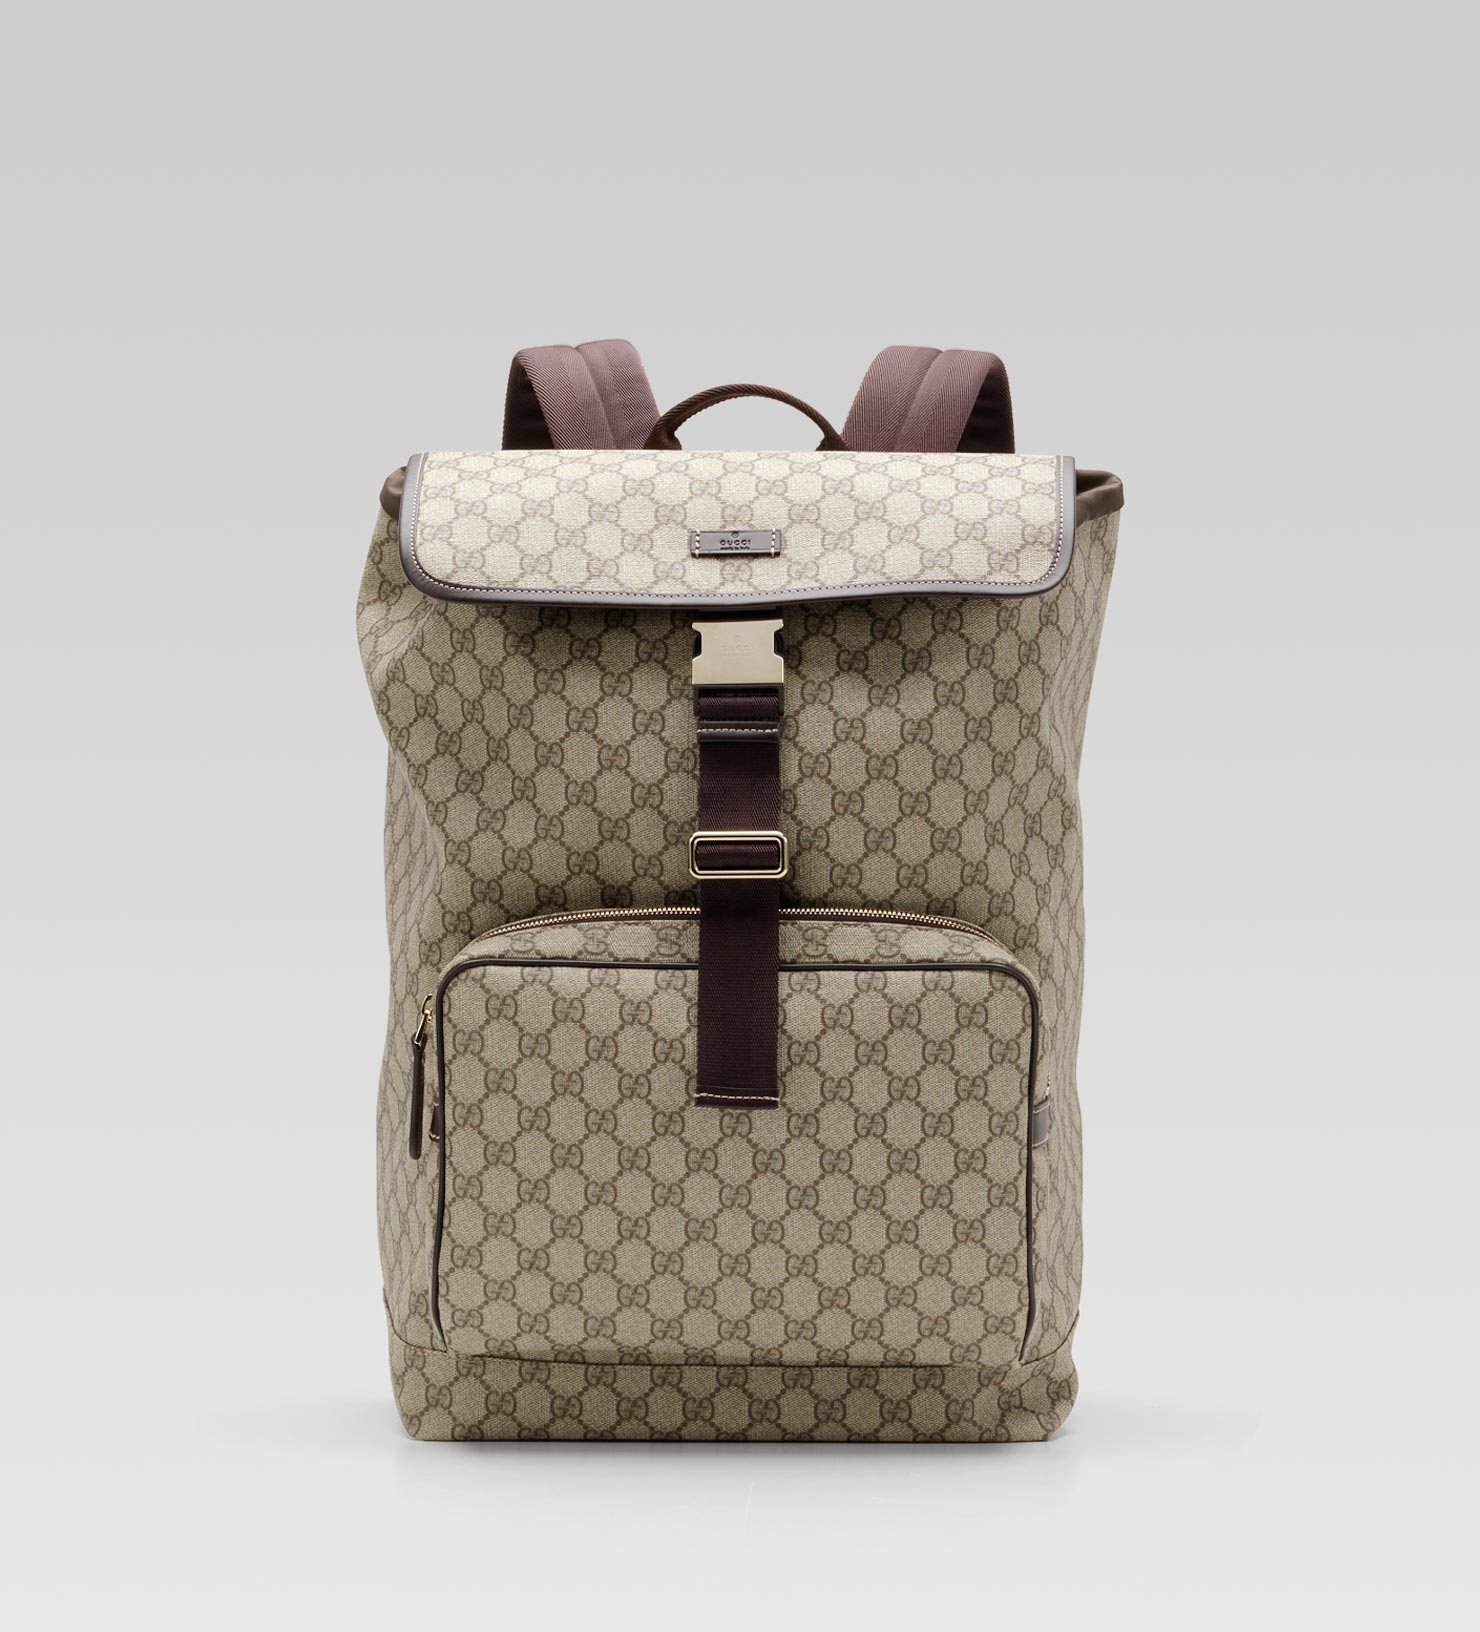 Lyst - Gucci Flap Backpack in Gray for Men